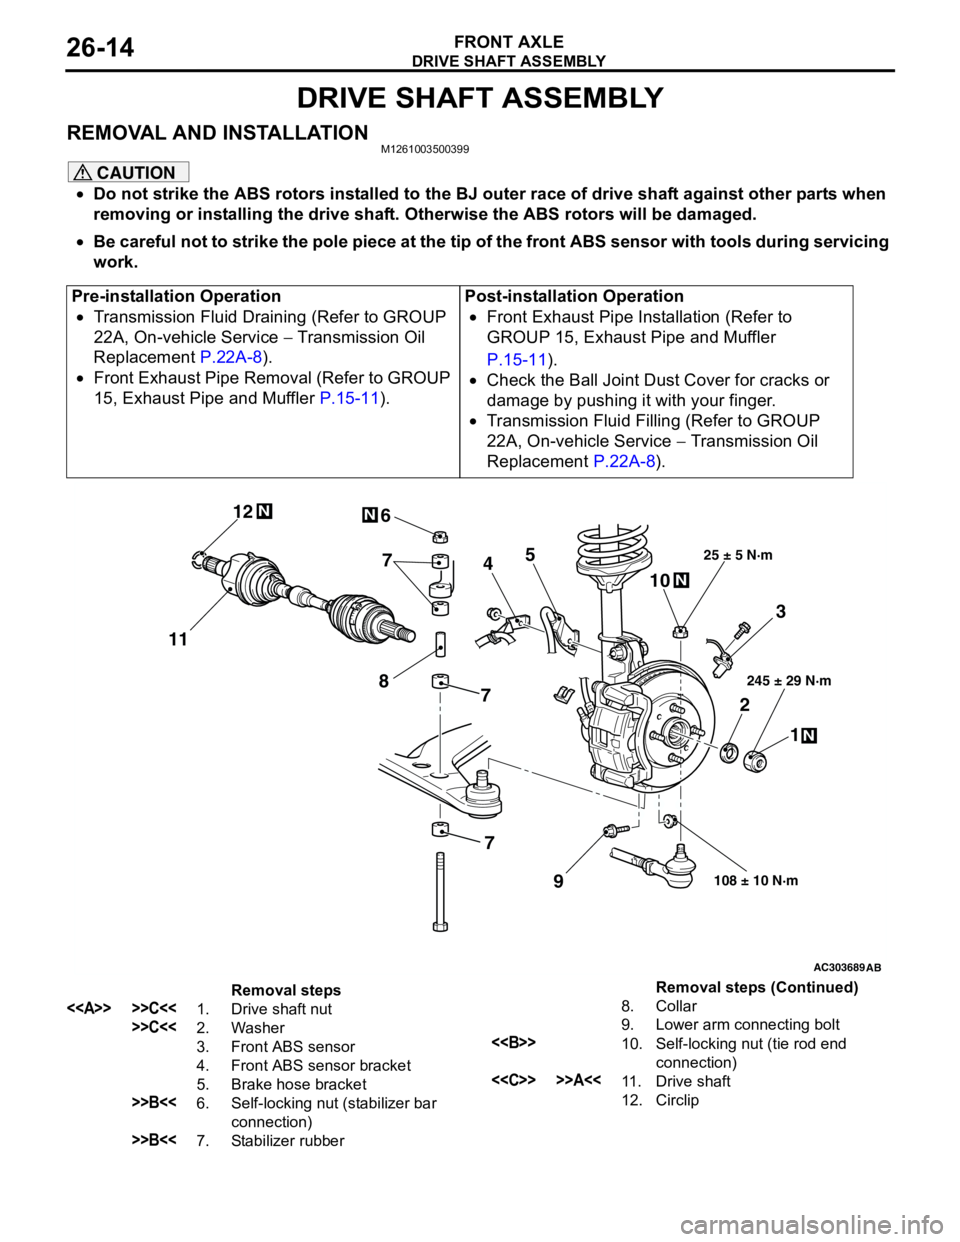 MITSUBISHI LANCER 2005  Workshop Manual DRIVE SHAFT ASSEMBLY
FRONT AXLE26-14
DRIVE SHAFT ASSEMBLY
REMOVAL AND INSTALLATIONM1261003500399
CAUTION
•Do not strike the ABS rotors installed to the BJ outer race of drive shaft against other par